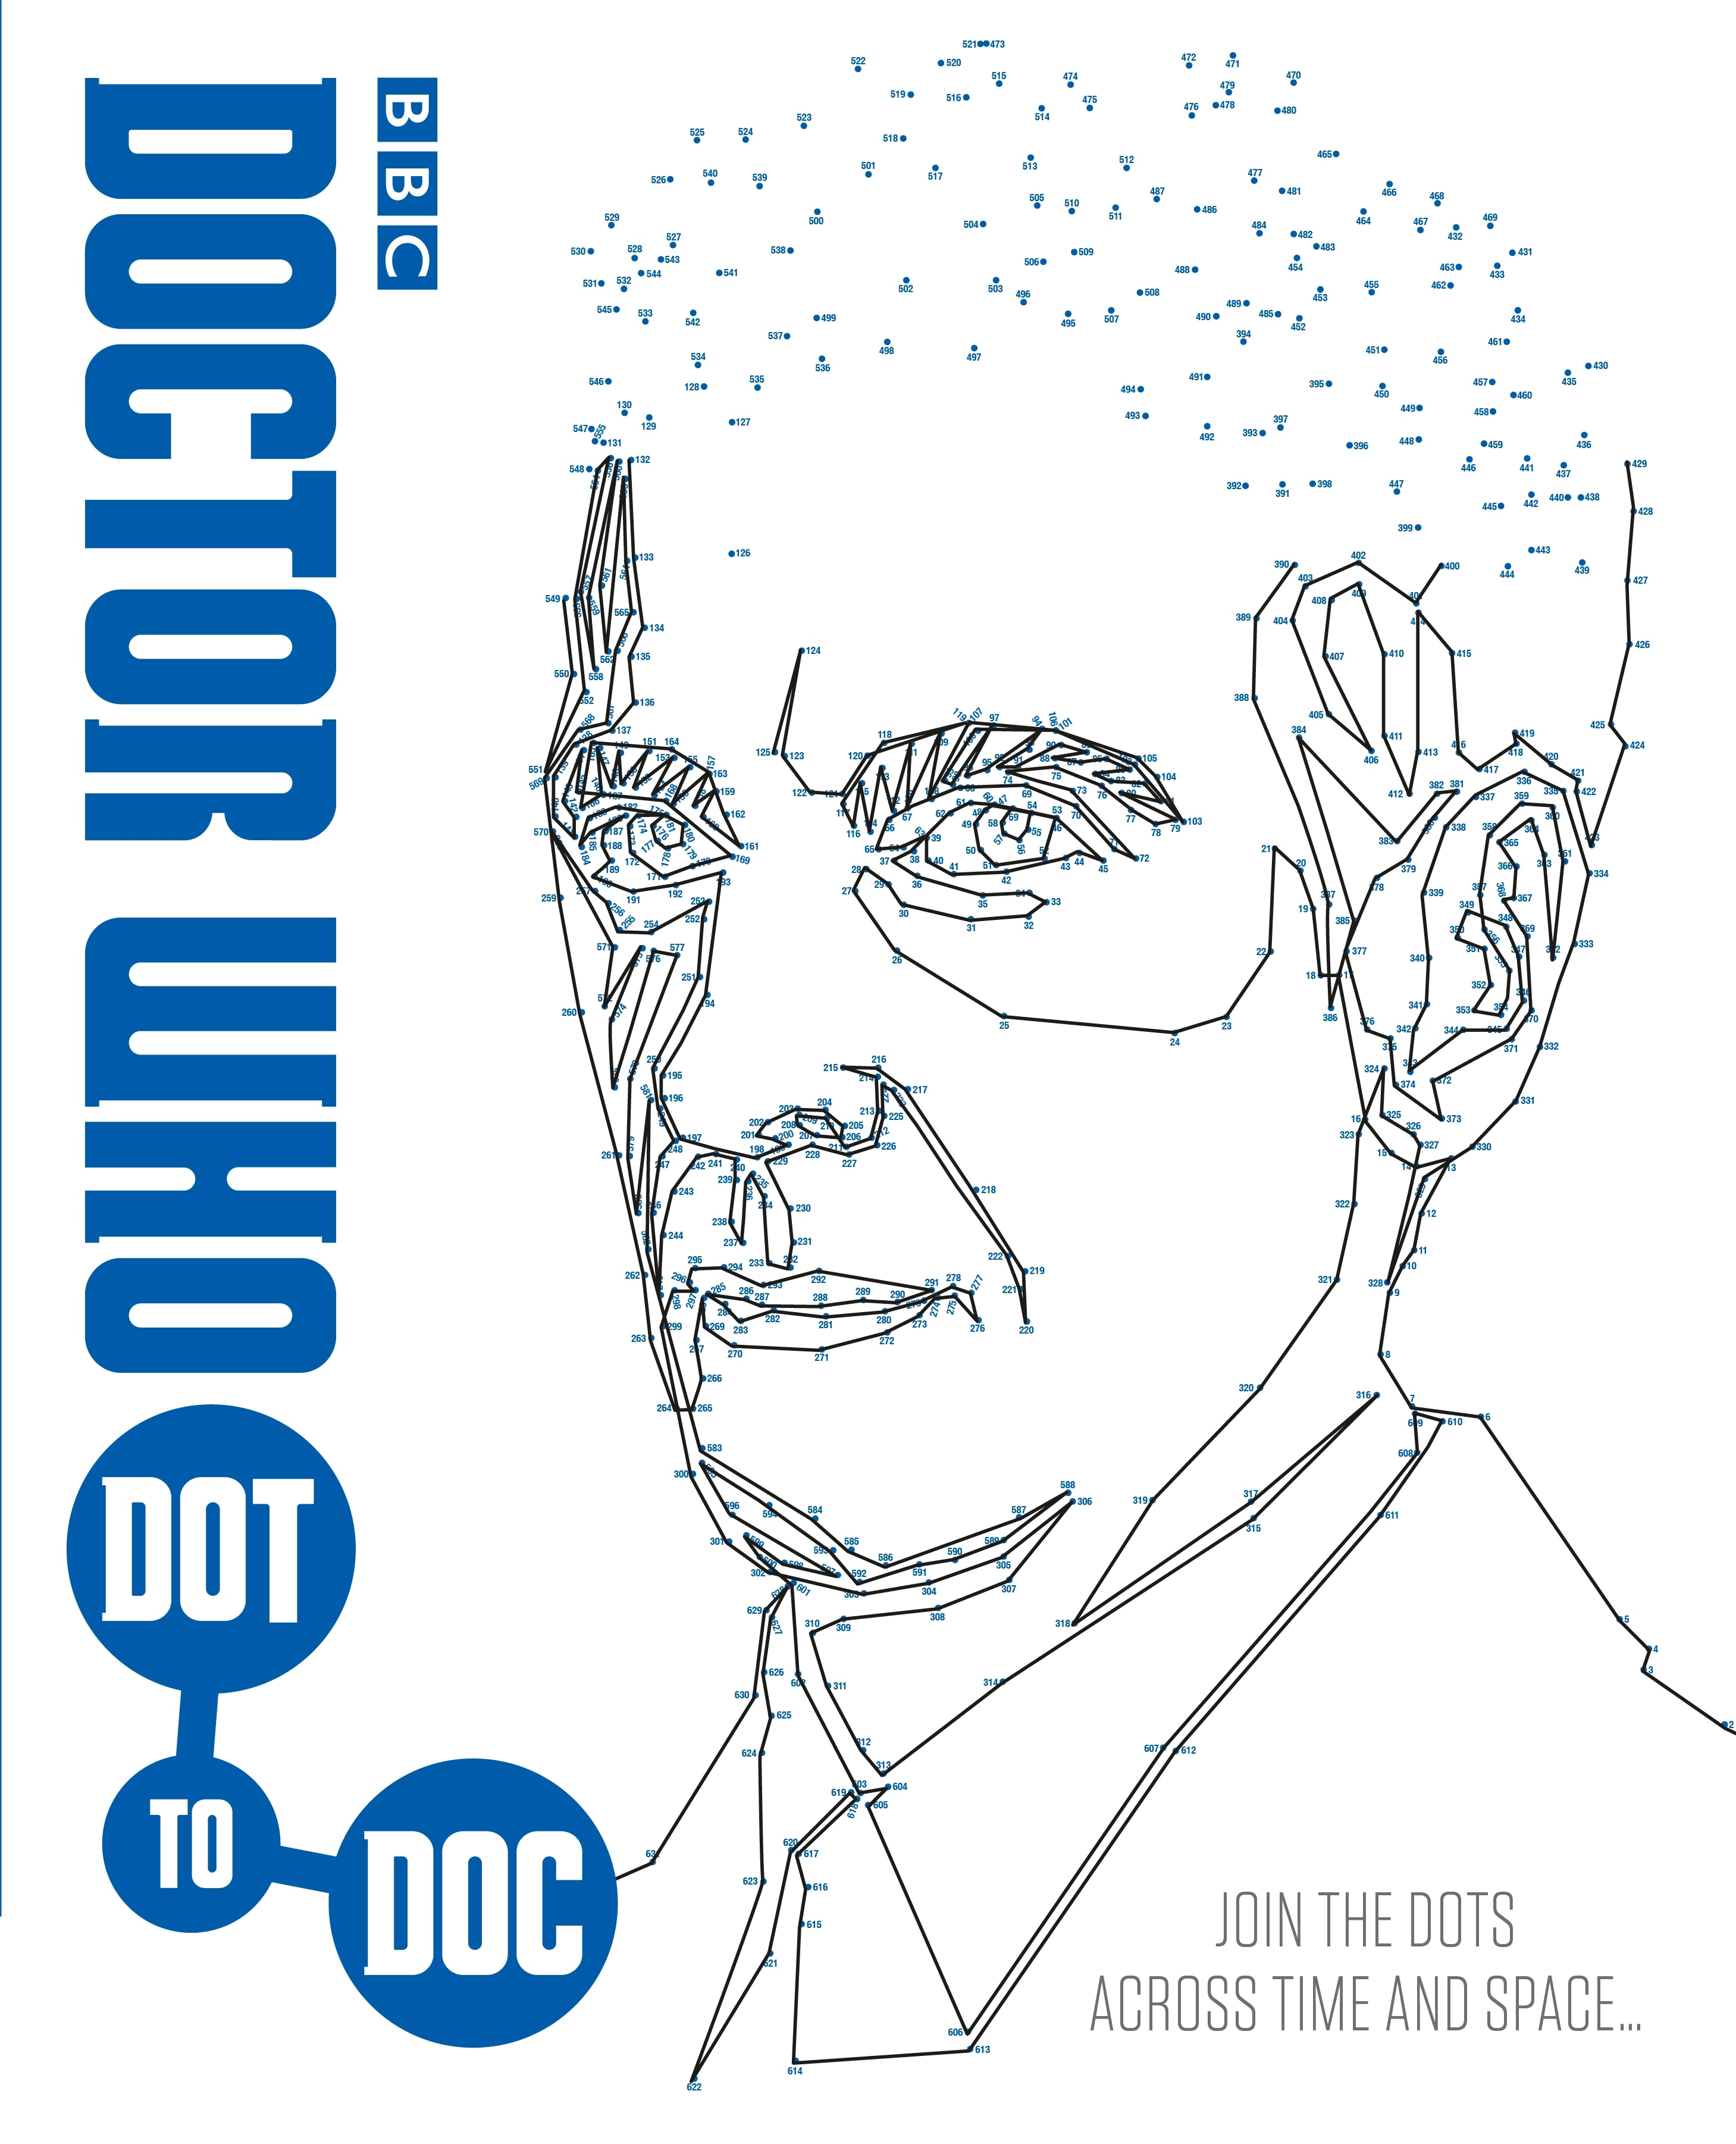 dot-to-dot image of the doctor